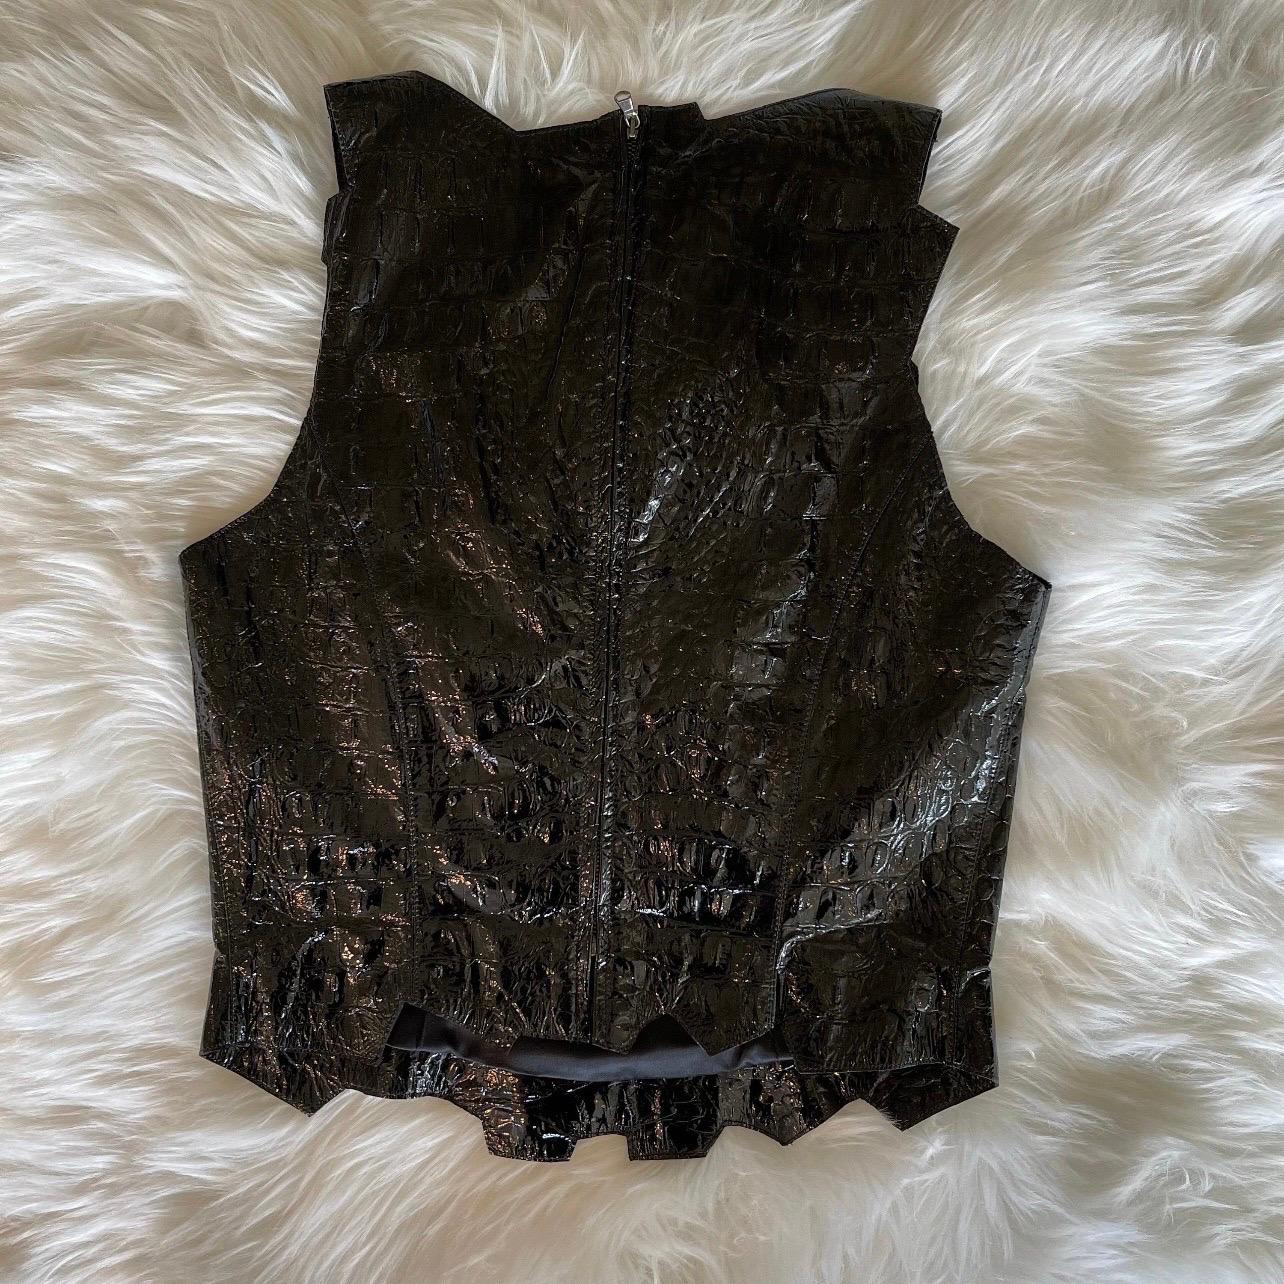 Vintage Thierry Mugler Black Leather Python Top In Excellent Condition For Sale In Malibu, CA